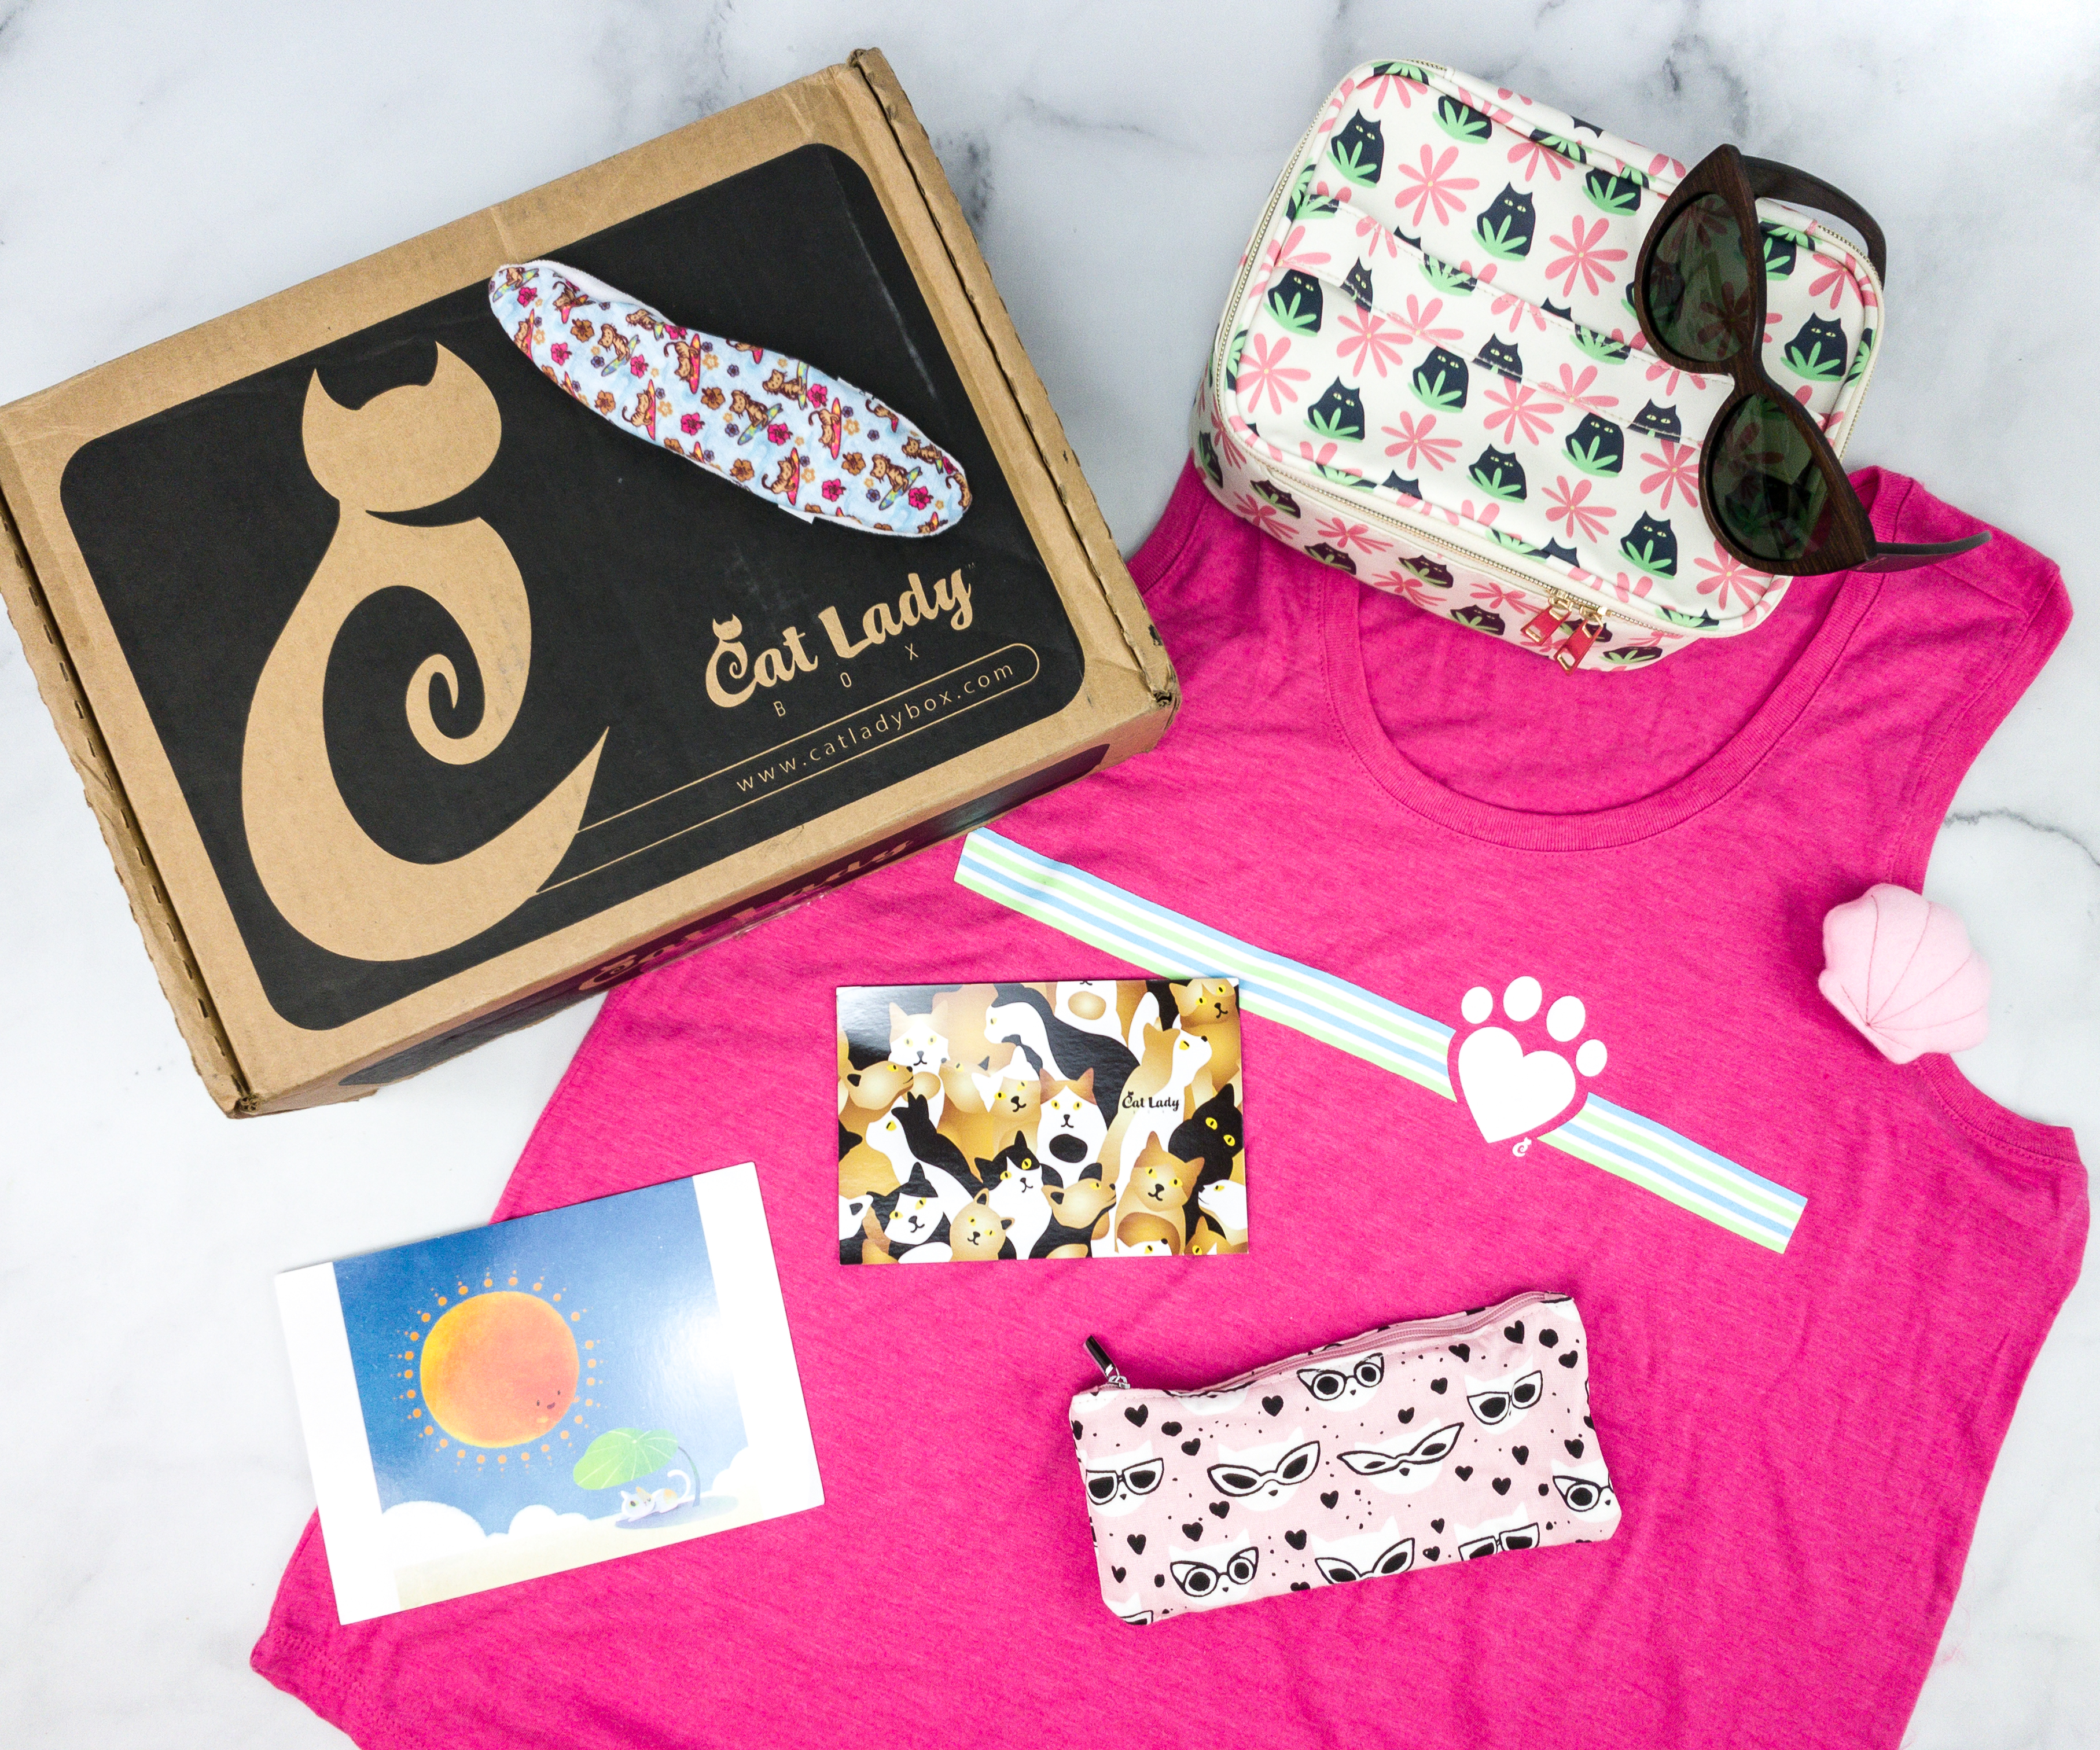 Cat Lady Box July 2020 Subscription Box Review PURR PARADISE Hello